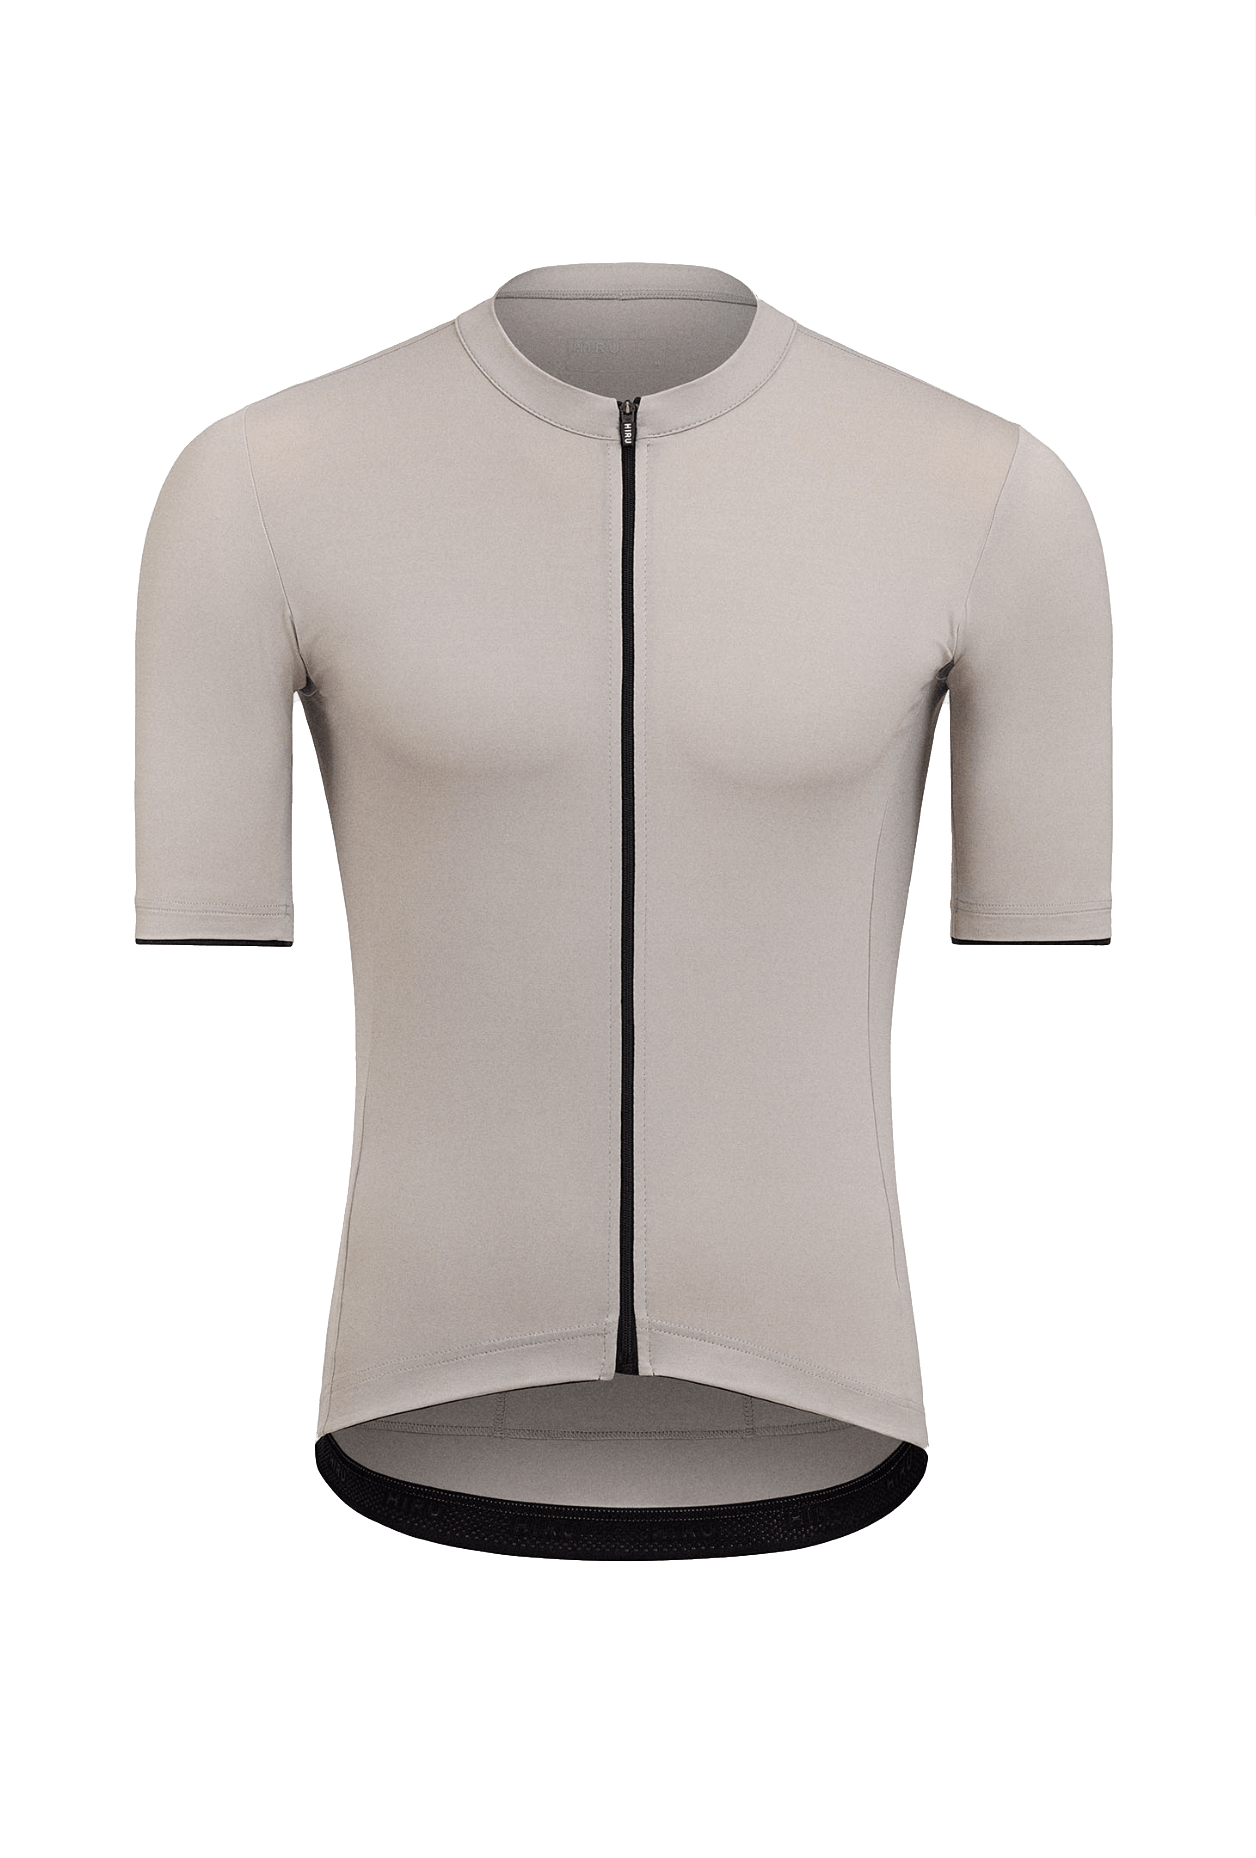 Hiru — Your new customizable and technical cycling apparel brand